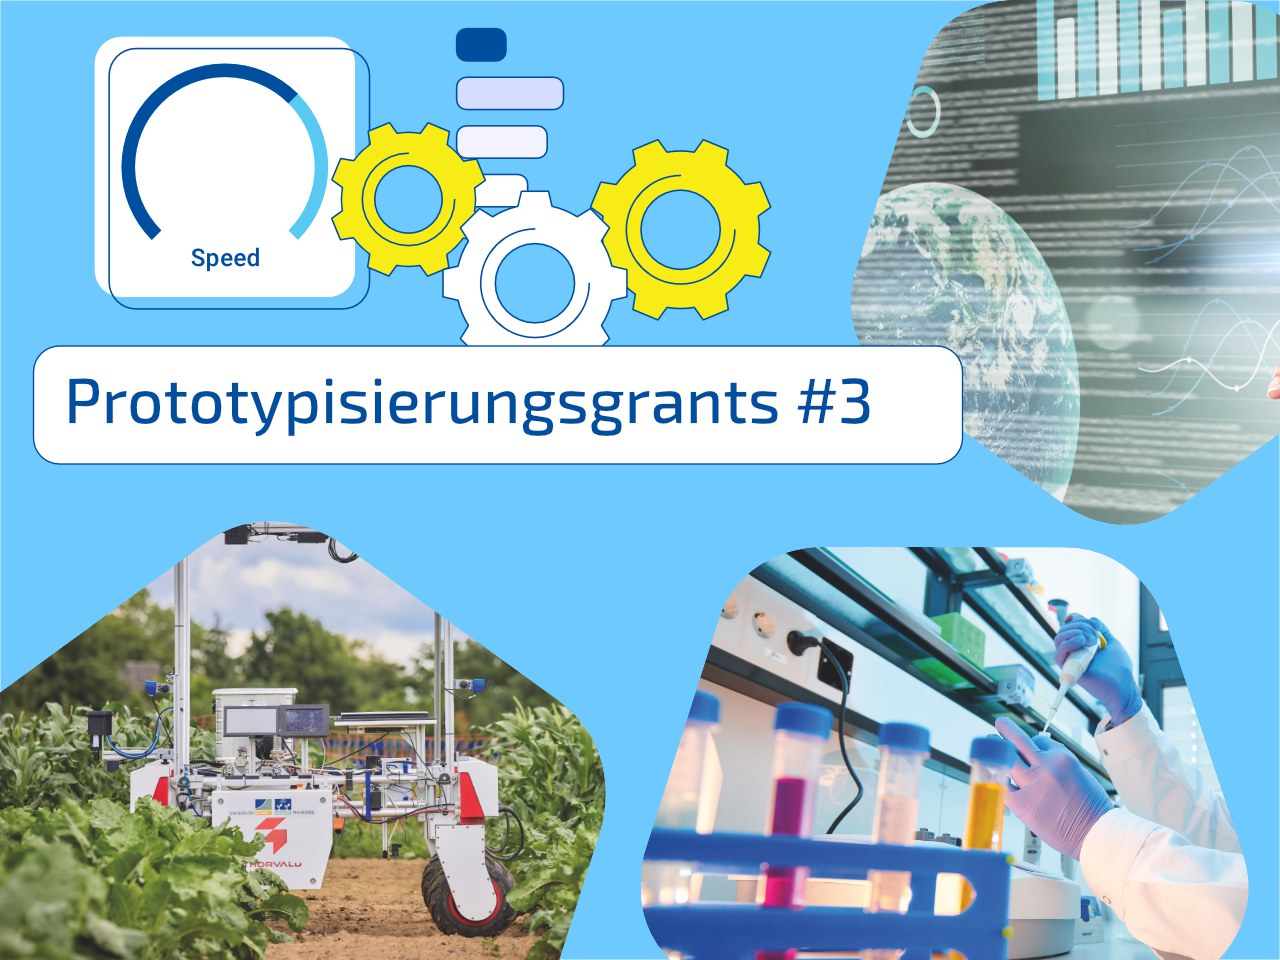 Prototyping grants from diverse disciplines